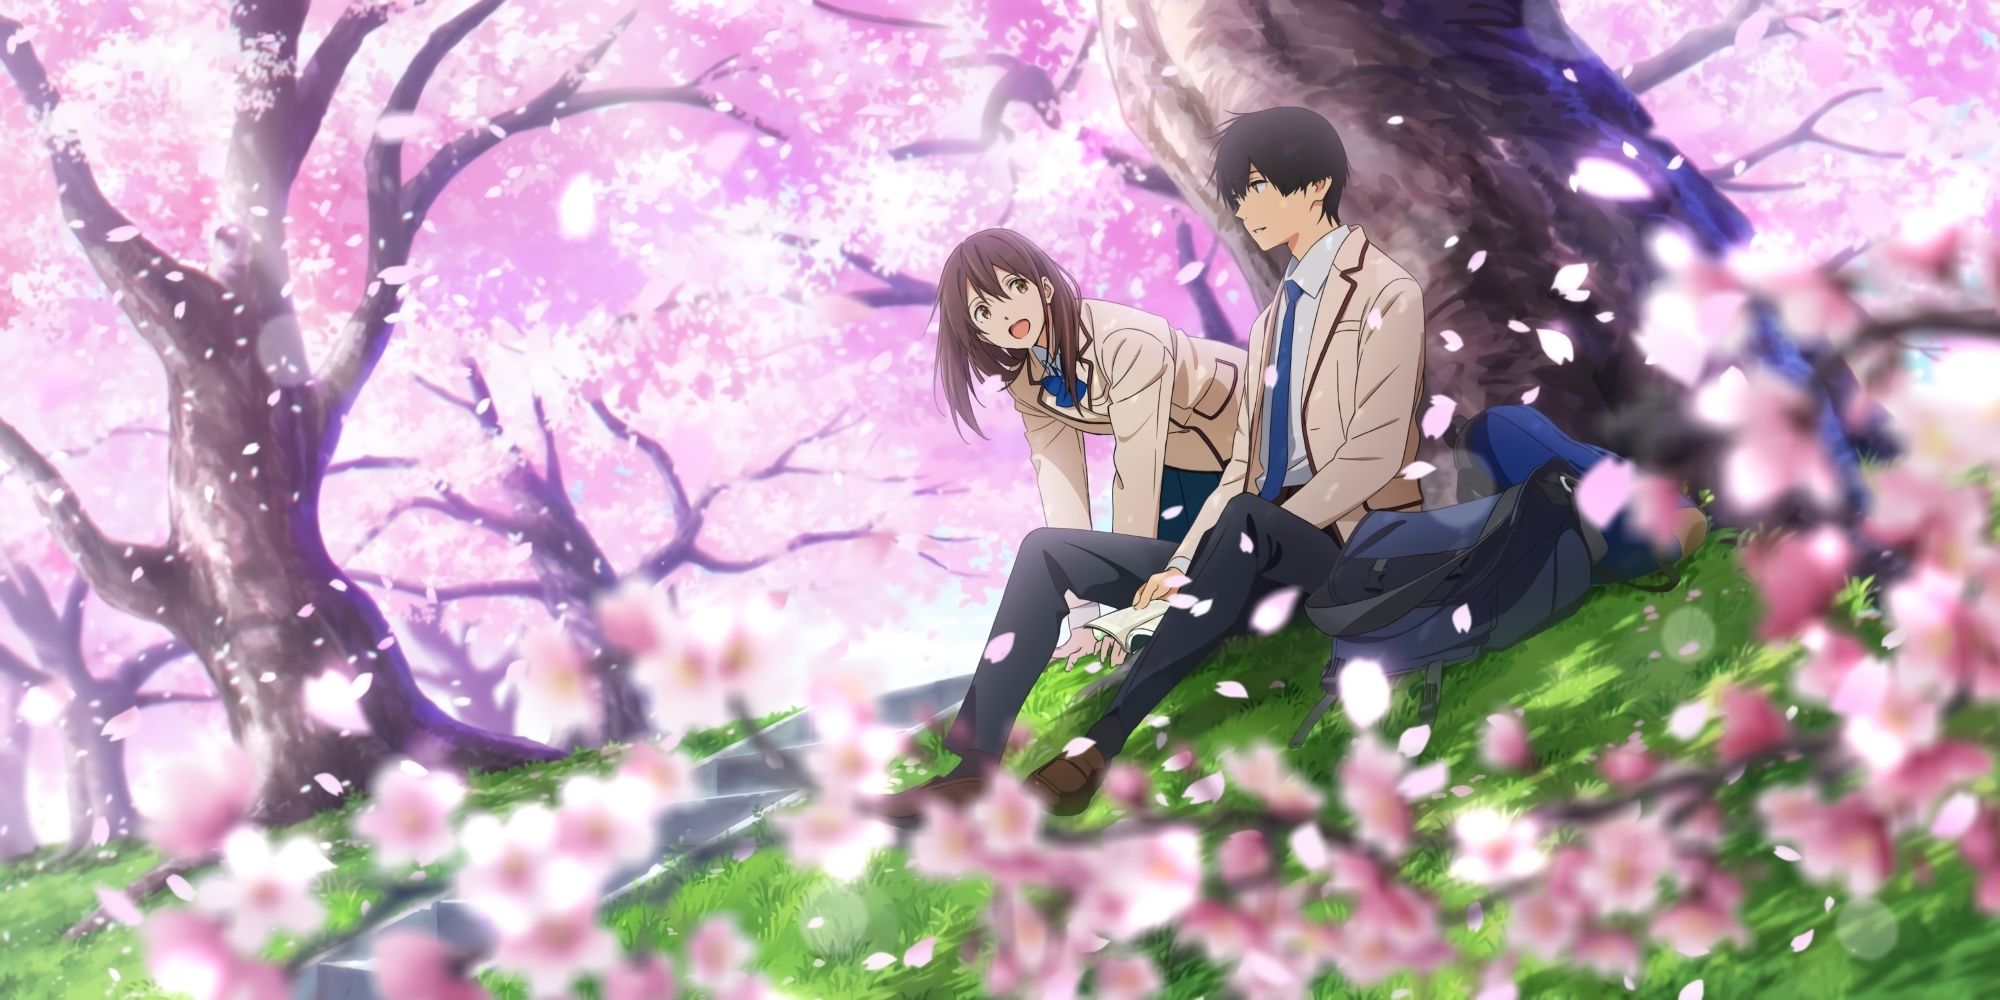  I Want To Eat Your Pancreas is one of the best movies like Your Name